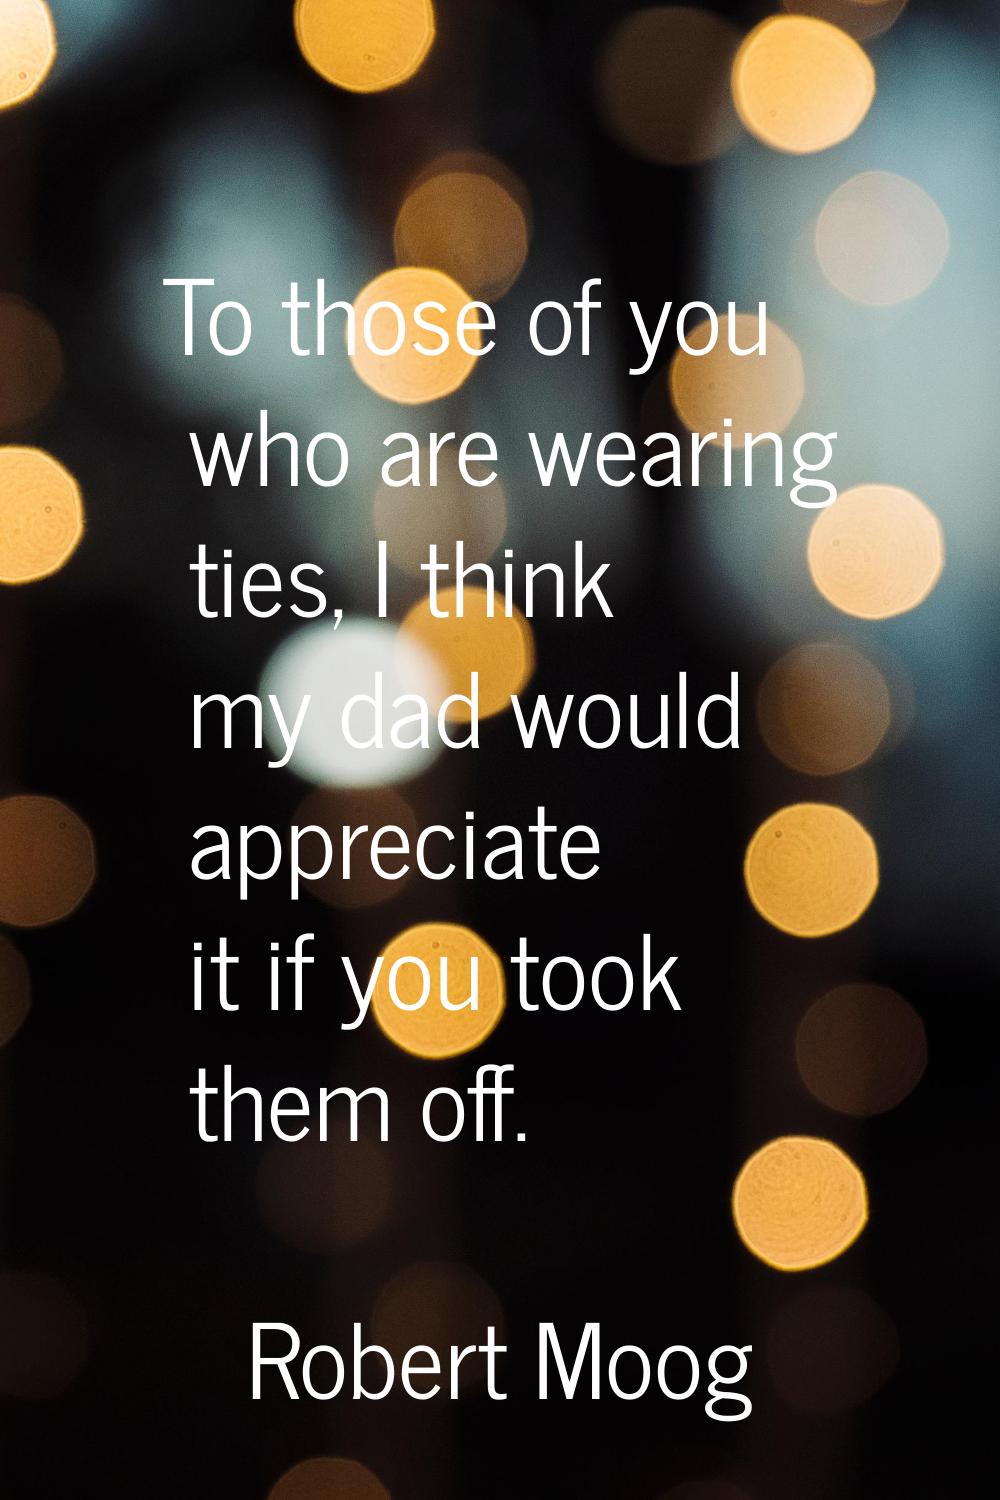 To those of you who are wearing ties, I think my dad would appreciate it if you took them off.